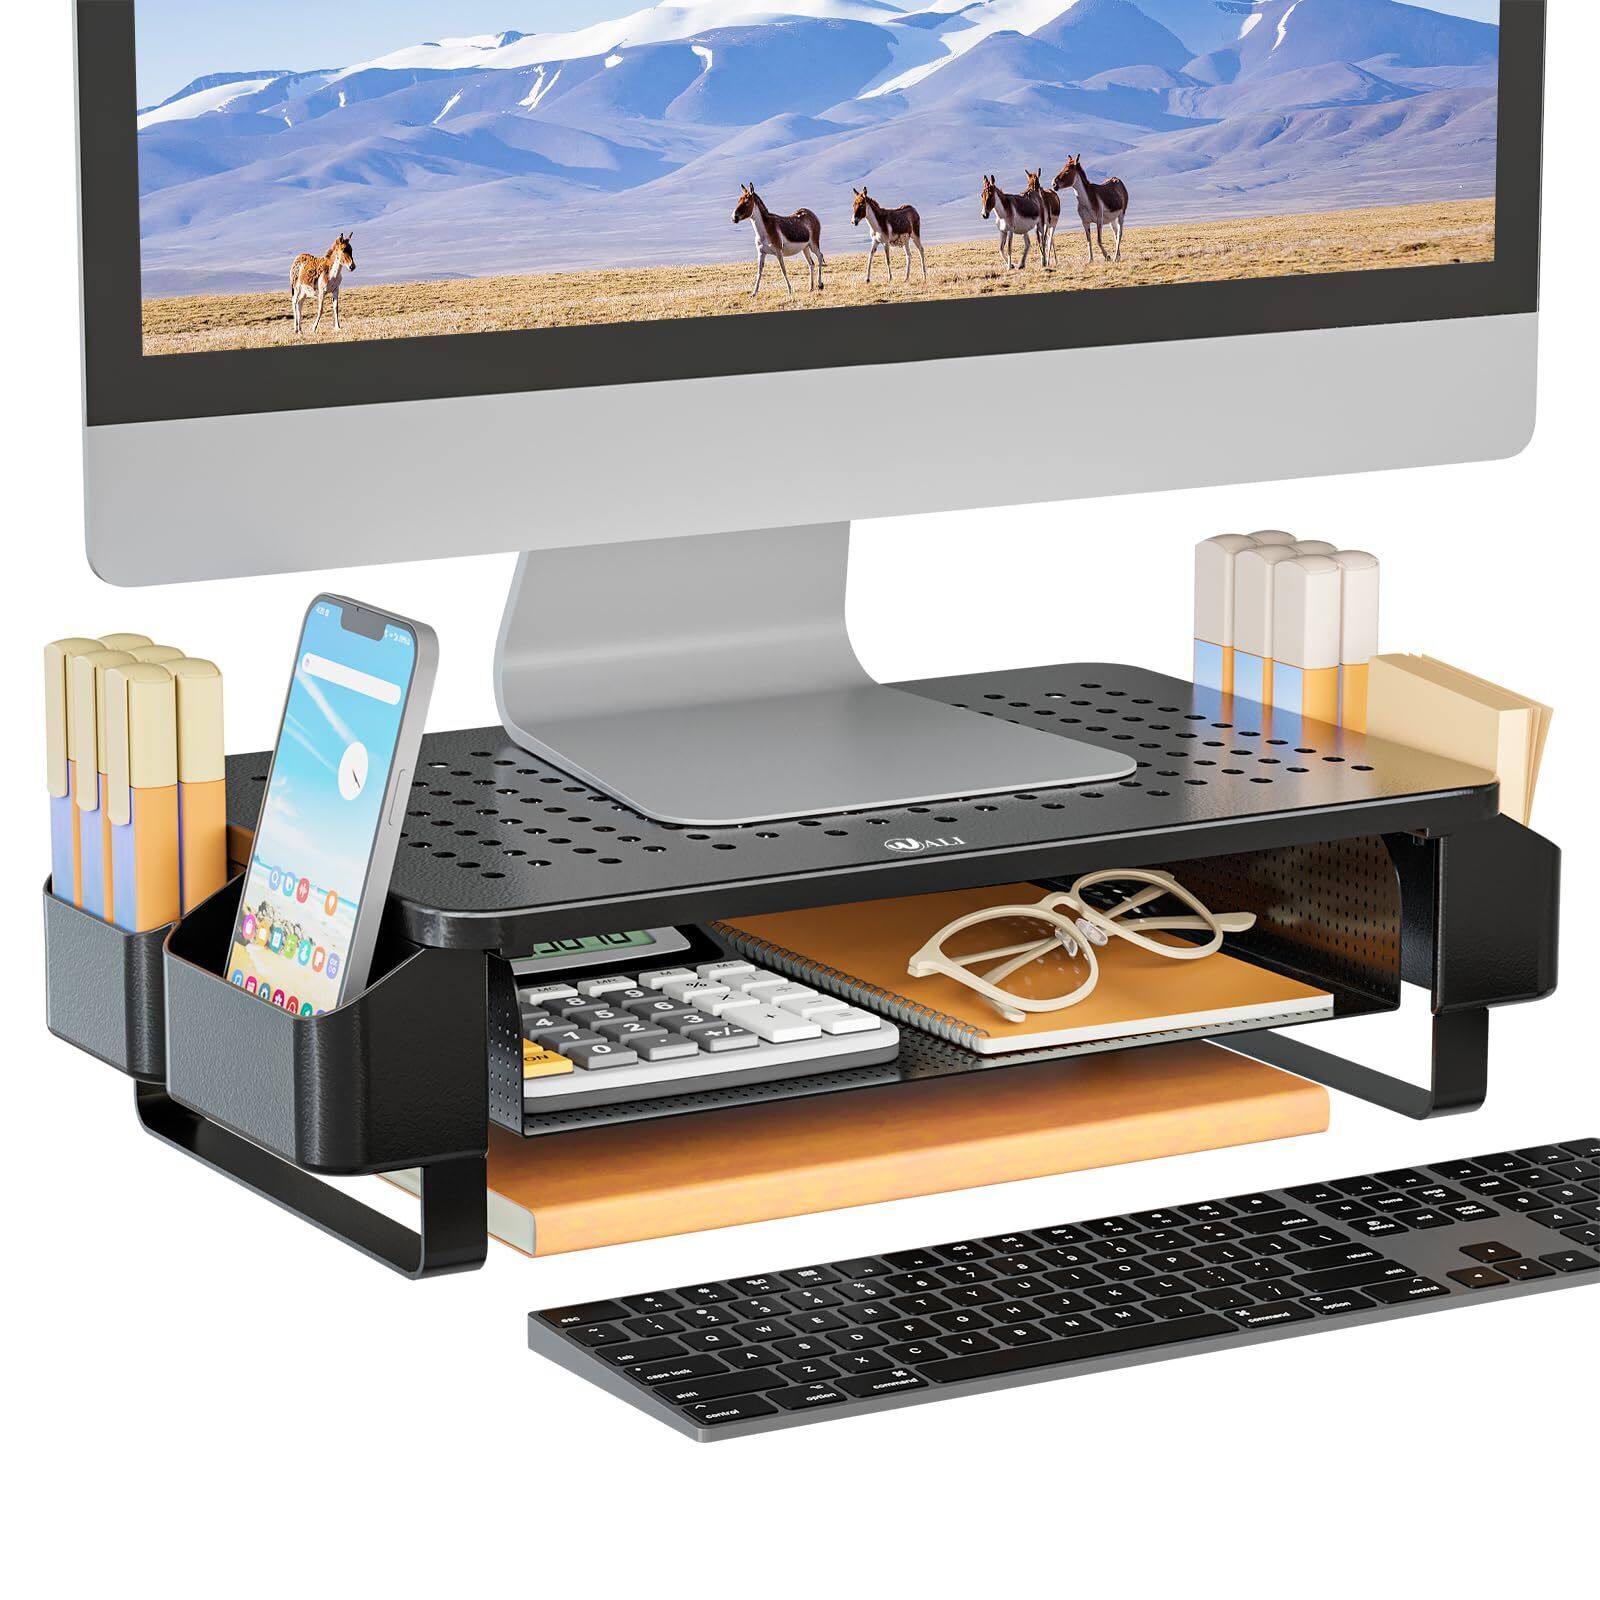 WALI Monitor Stand with Storage, Monitor Stand Riser with Ventilation Drawer ...